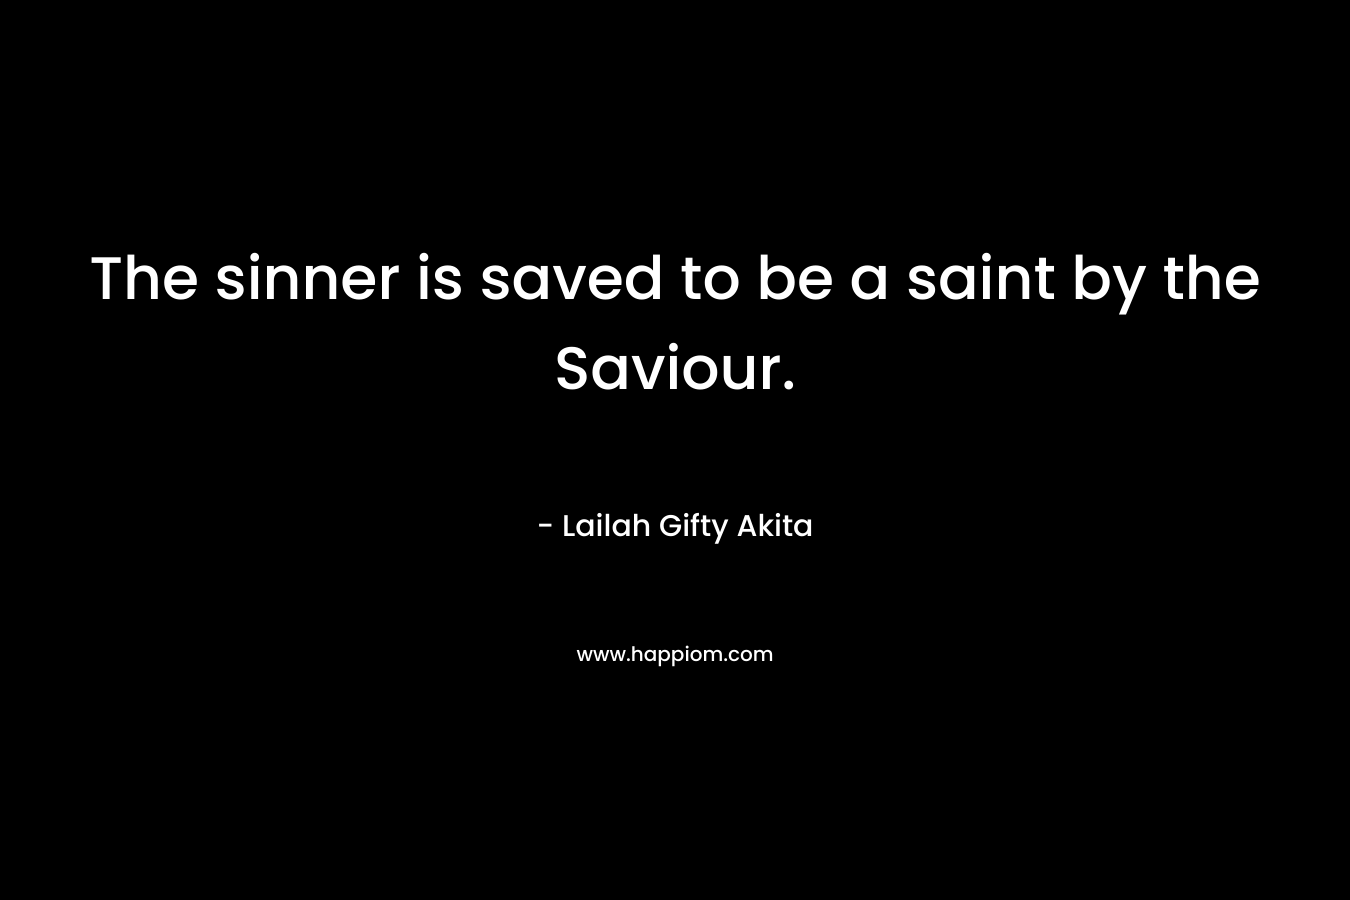 The sinner is saved to be a saint by the Saviour. – Lailah Gifty Akita